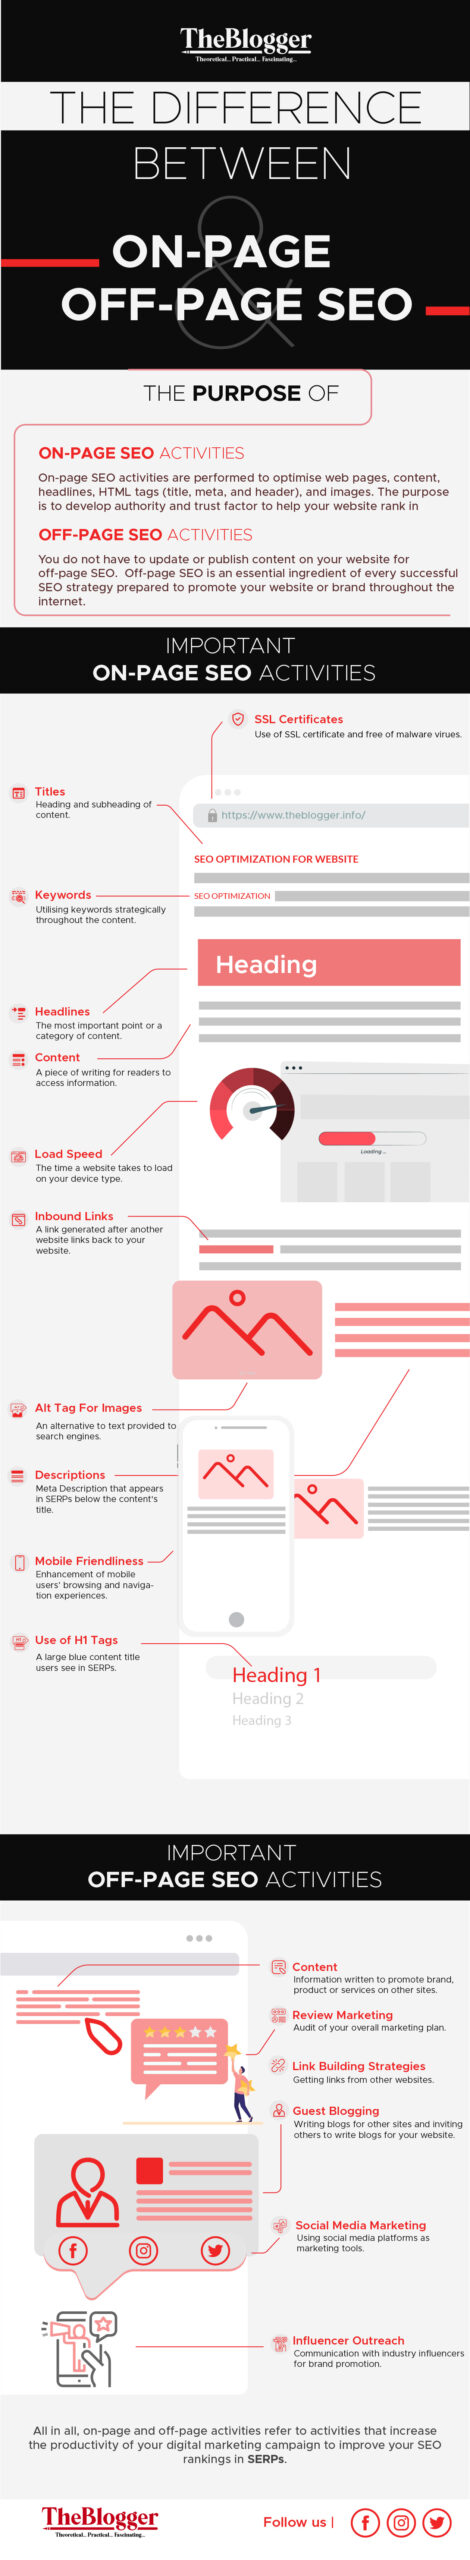 difference-between-on-page-and-off-page-seo-infographic